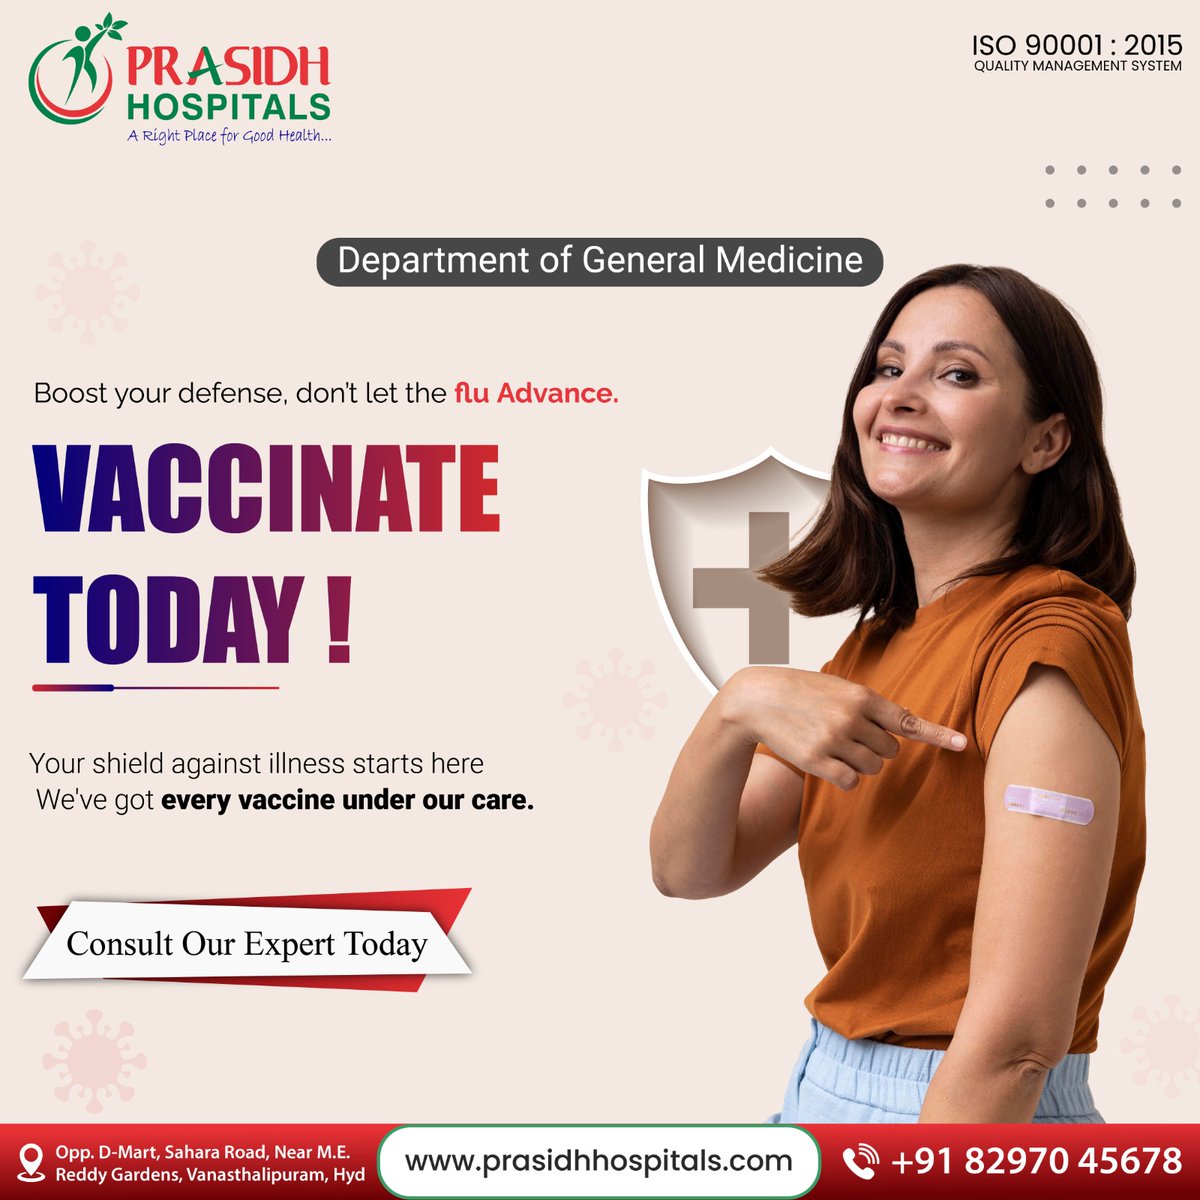 Protect yourself this flu season with the renowned flu vaccine services at Prasidh Hospital! Our experienced medical team administers safe and effective vaccines to safeguard you and your loved ones from seasonal influenza. 

#generalmedicine #vaccinatetoday #vaccination #Prasidh